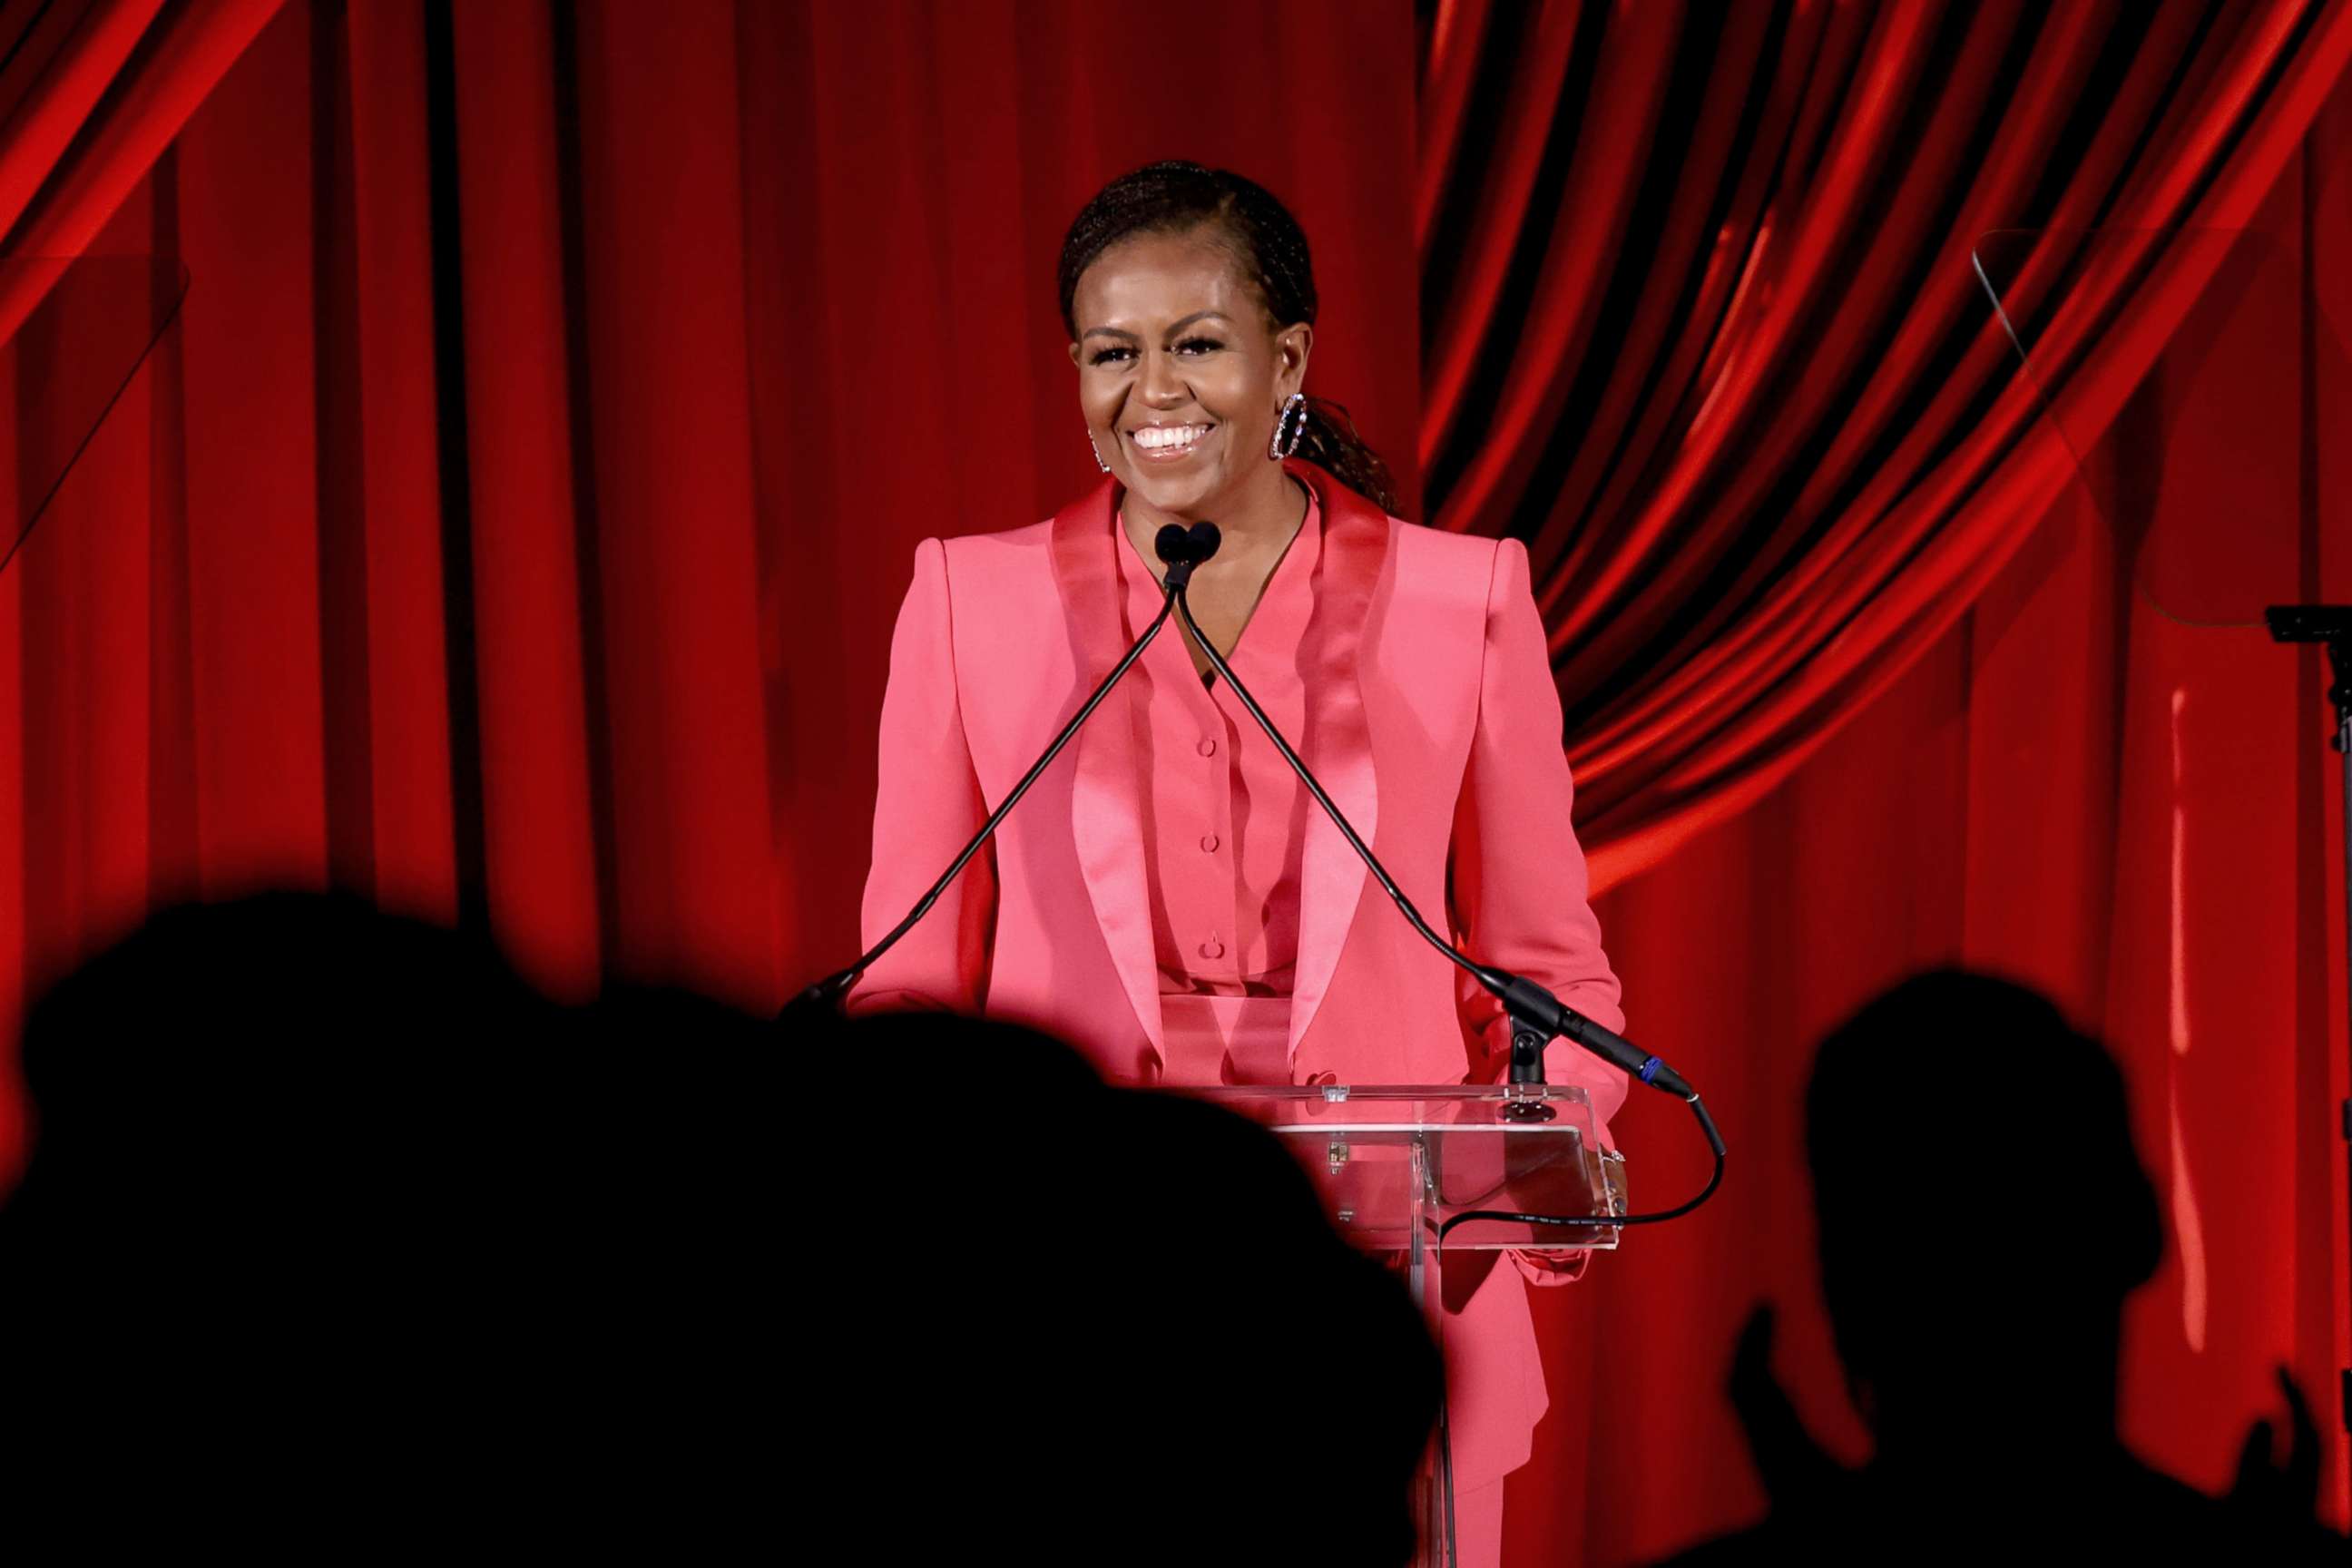 PHOTO: Former First Lady Michelle Obama speaks at an event on Sept. 29, 2022, in New York City. 